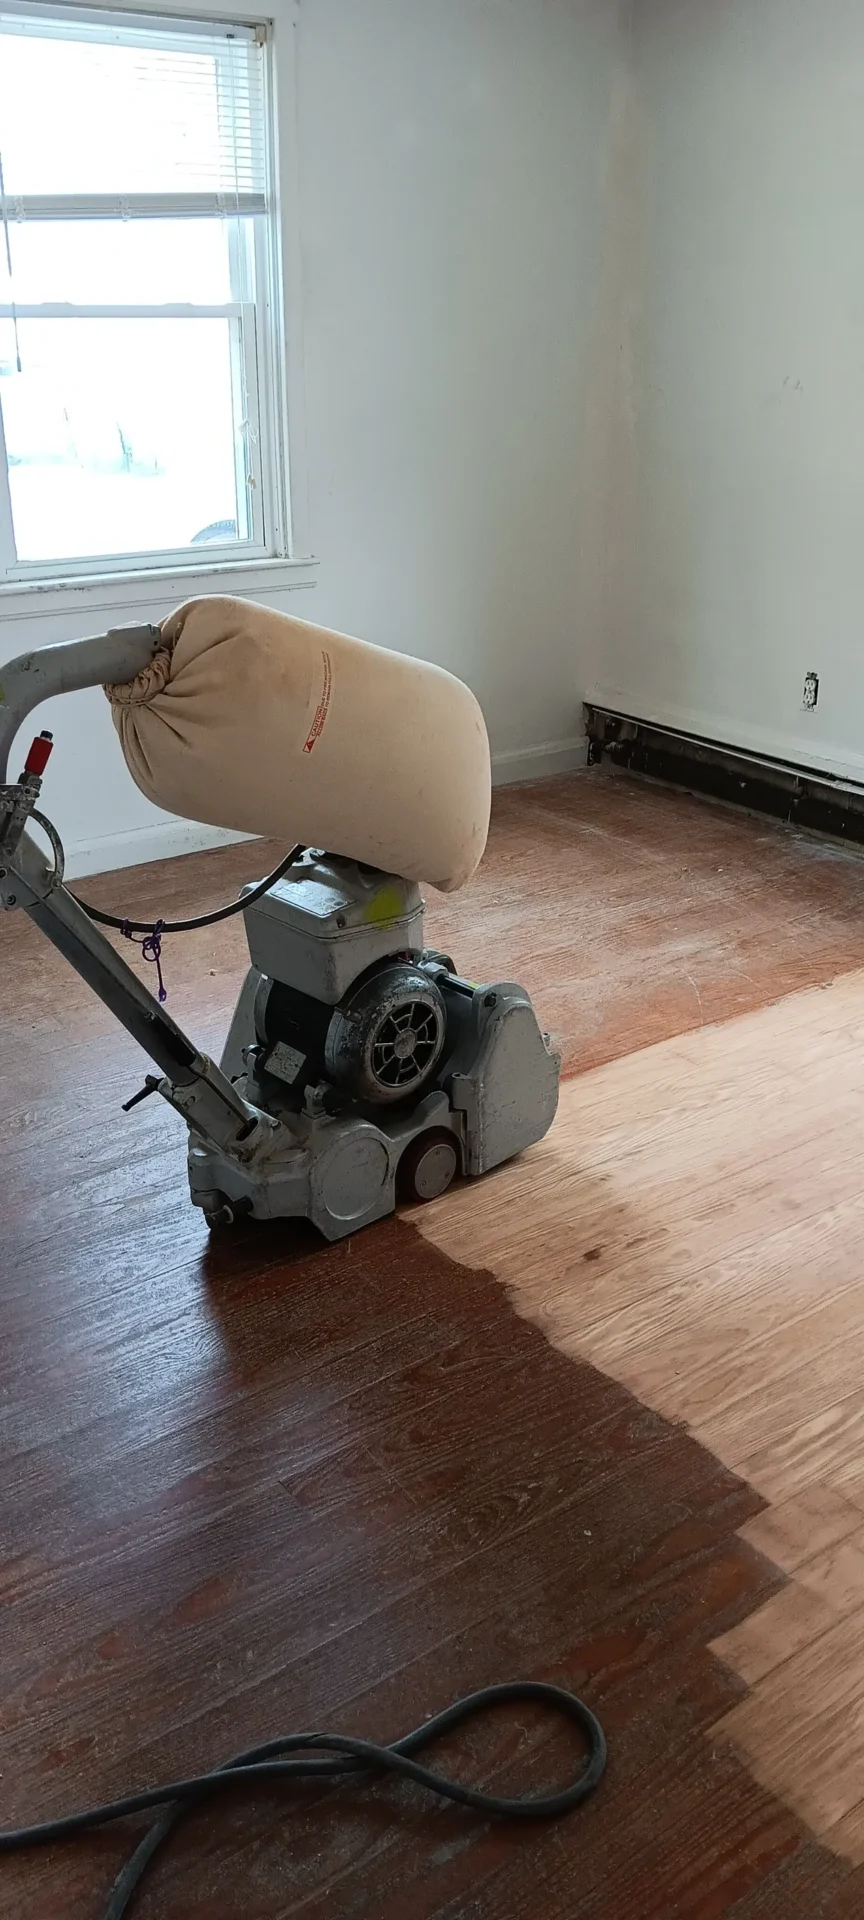 A floor sander is on the ground in a room.